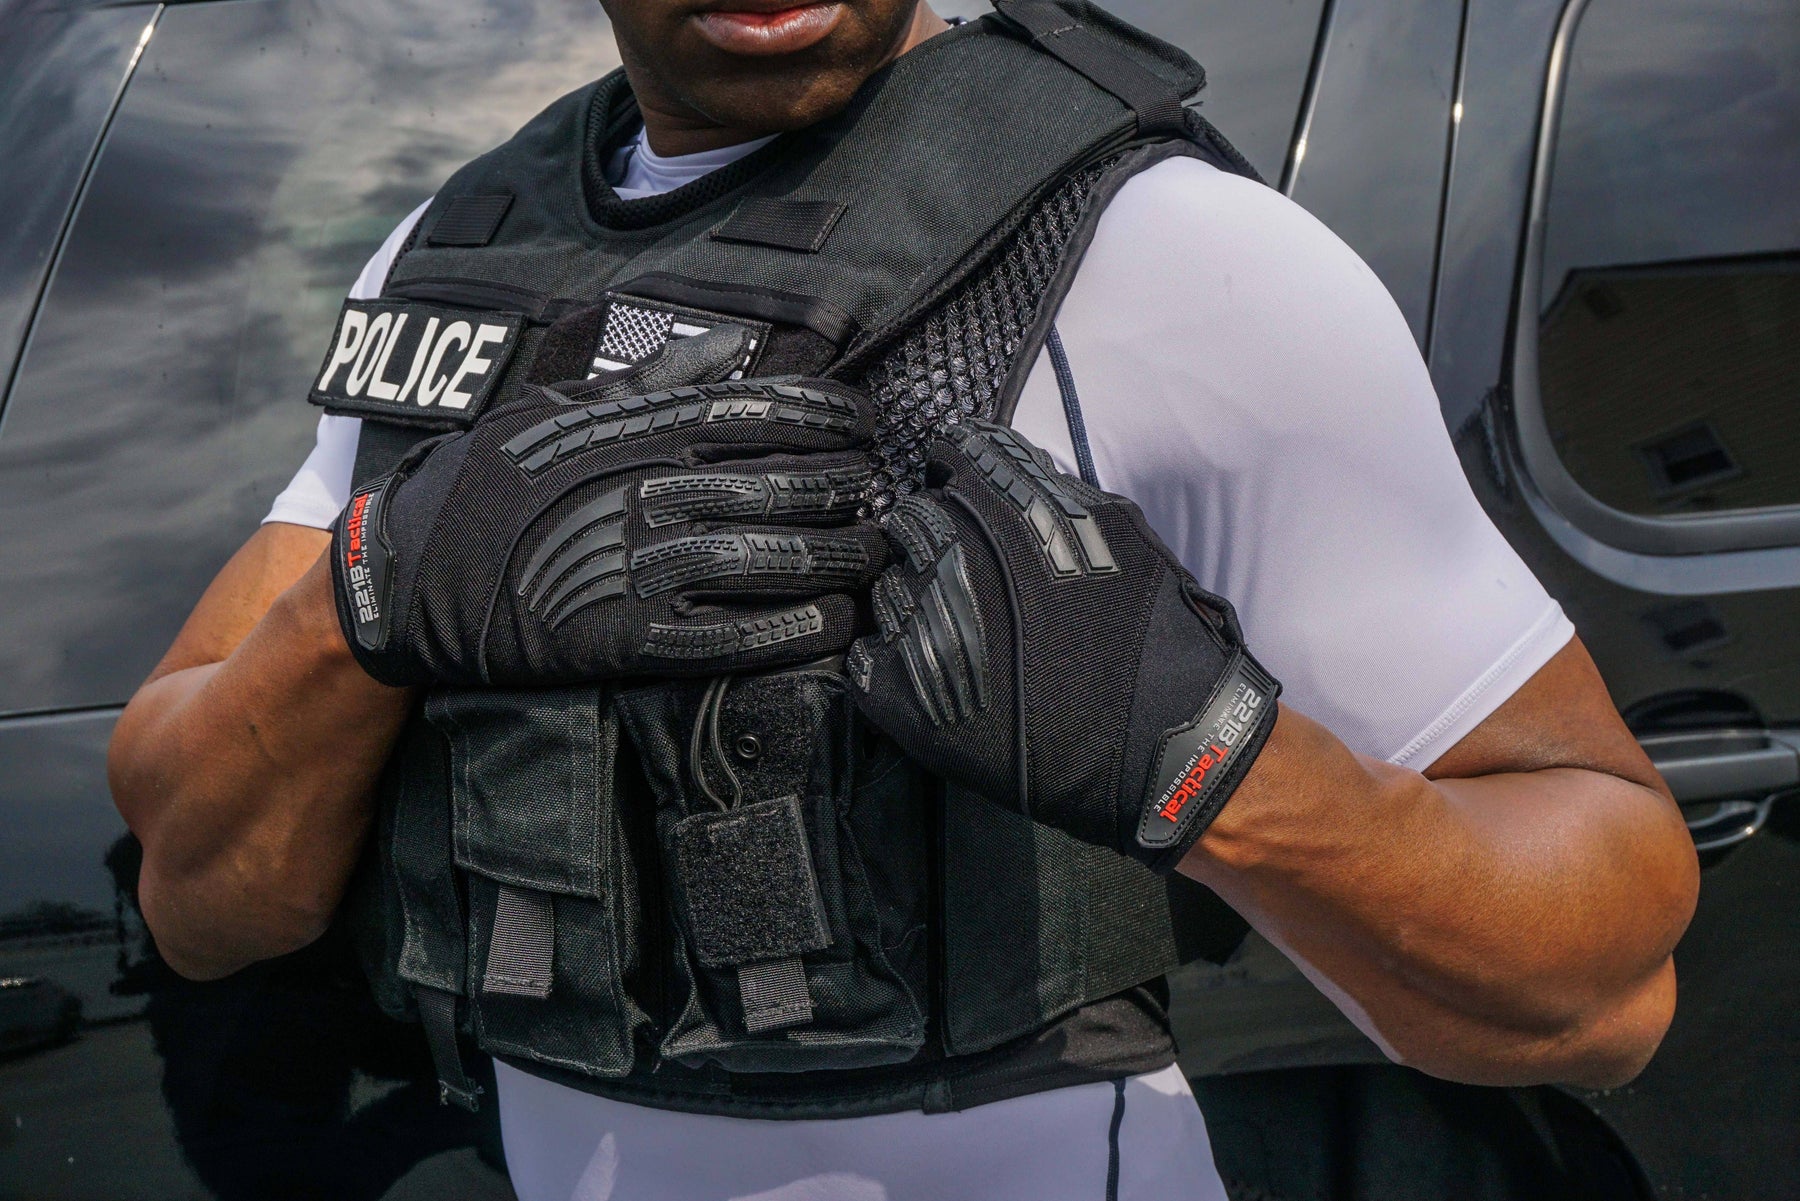 The Best New Search Gloves For Police Officers and Tactical Patrol - Now Available In All Black